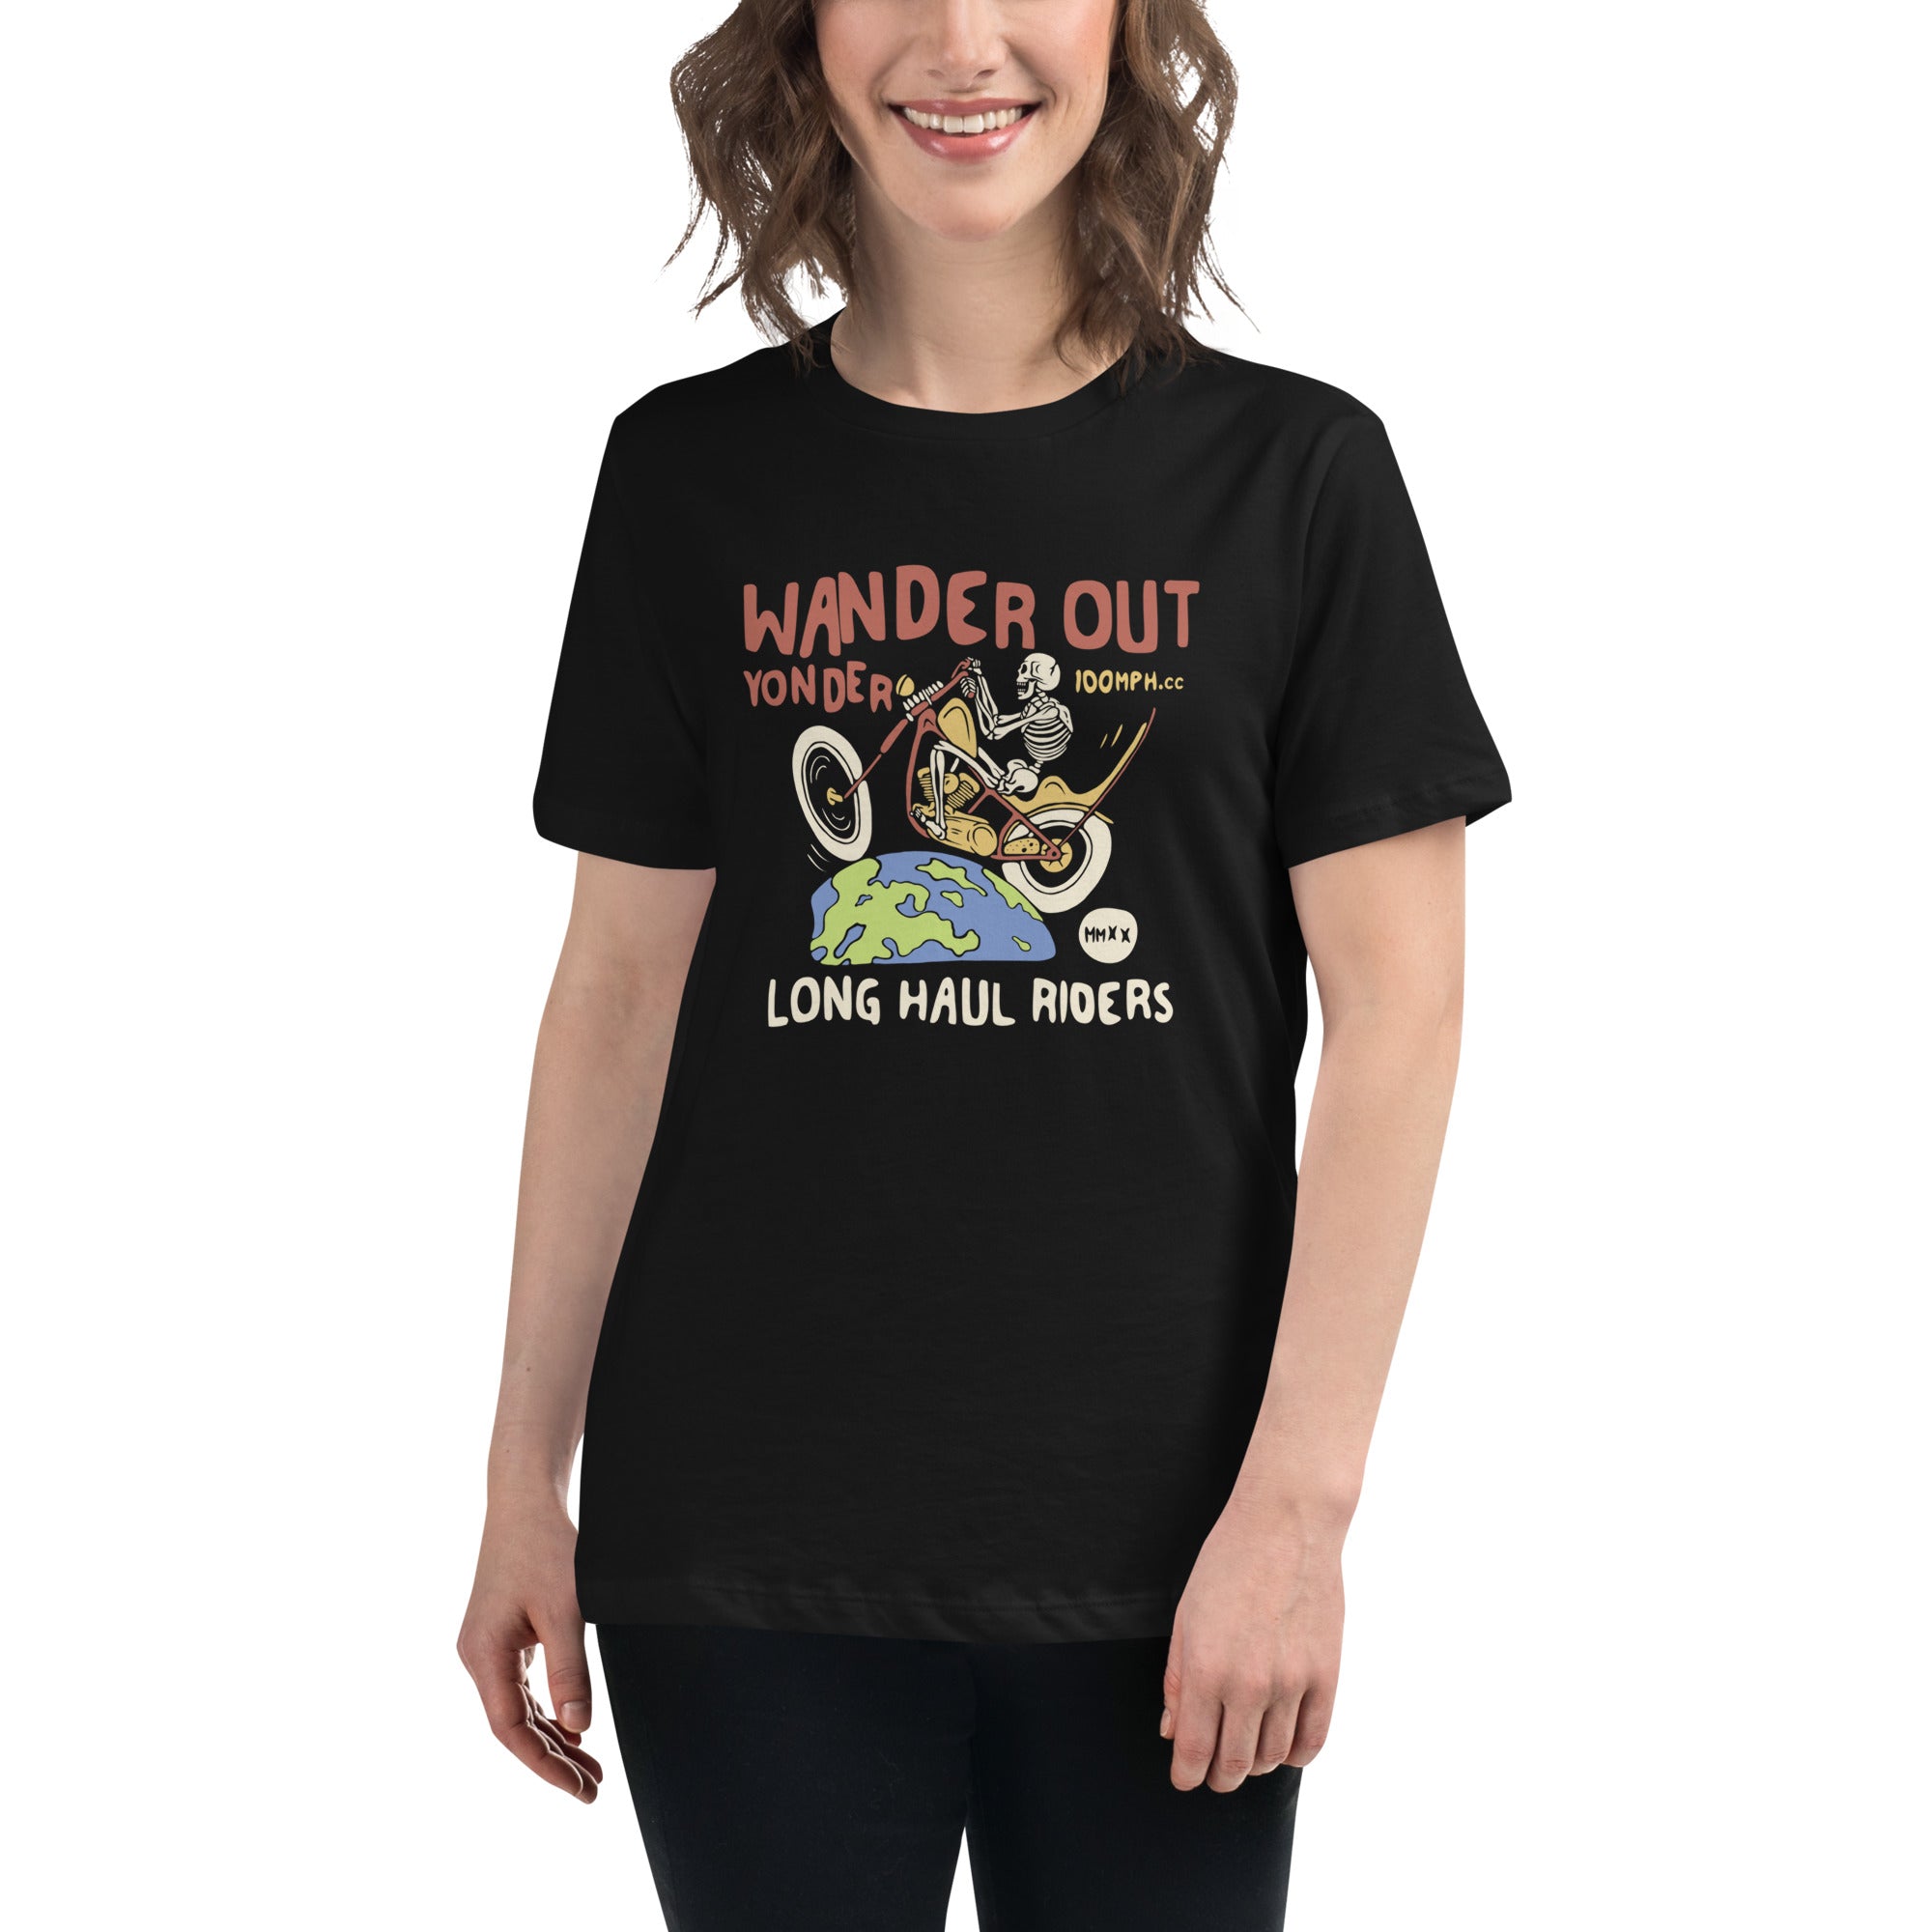 Wander Out Yonder - Women's